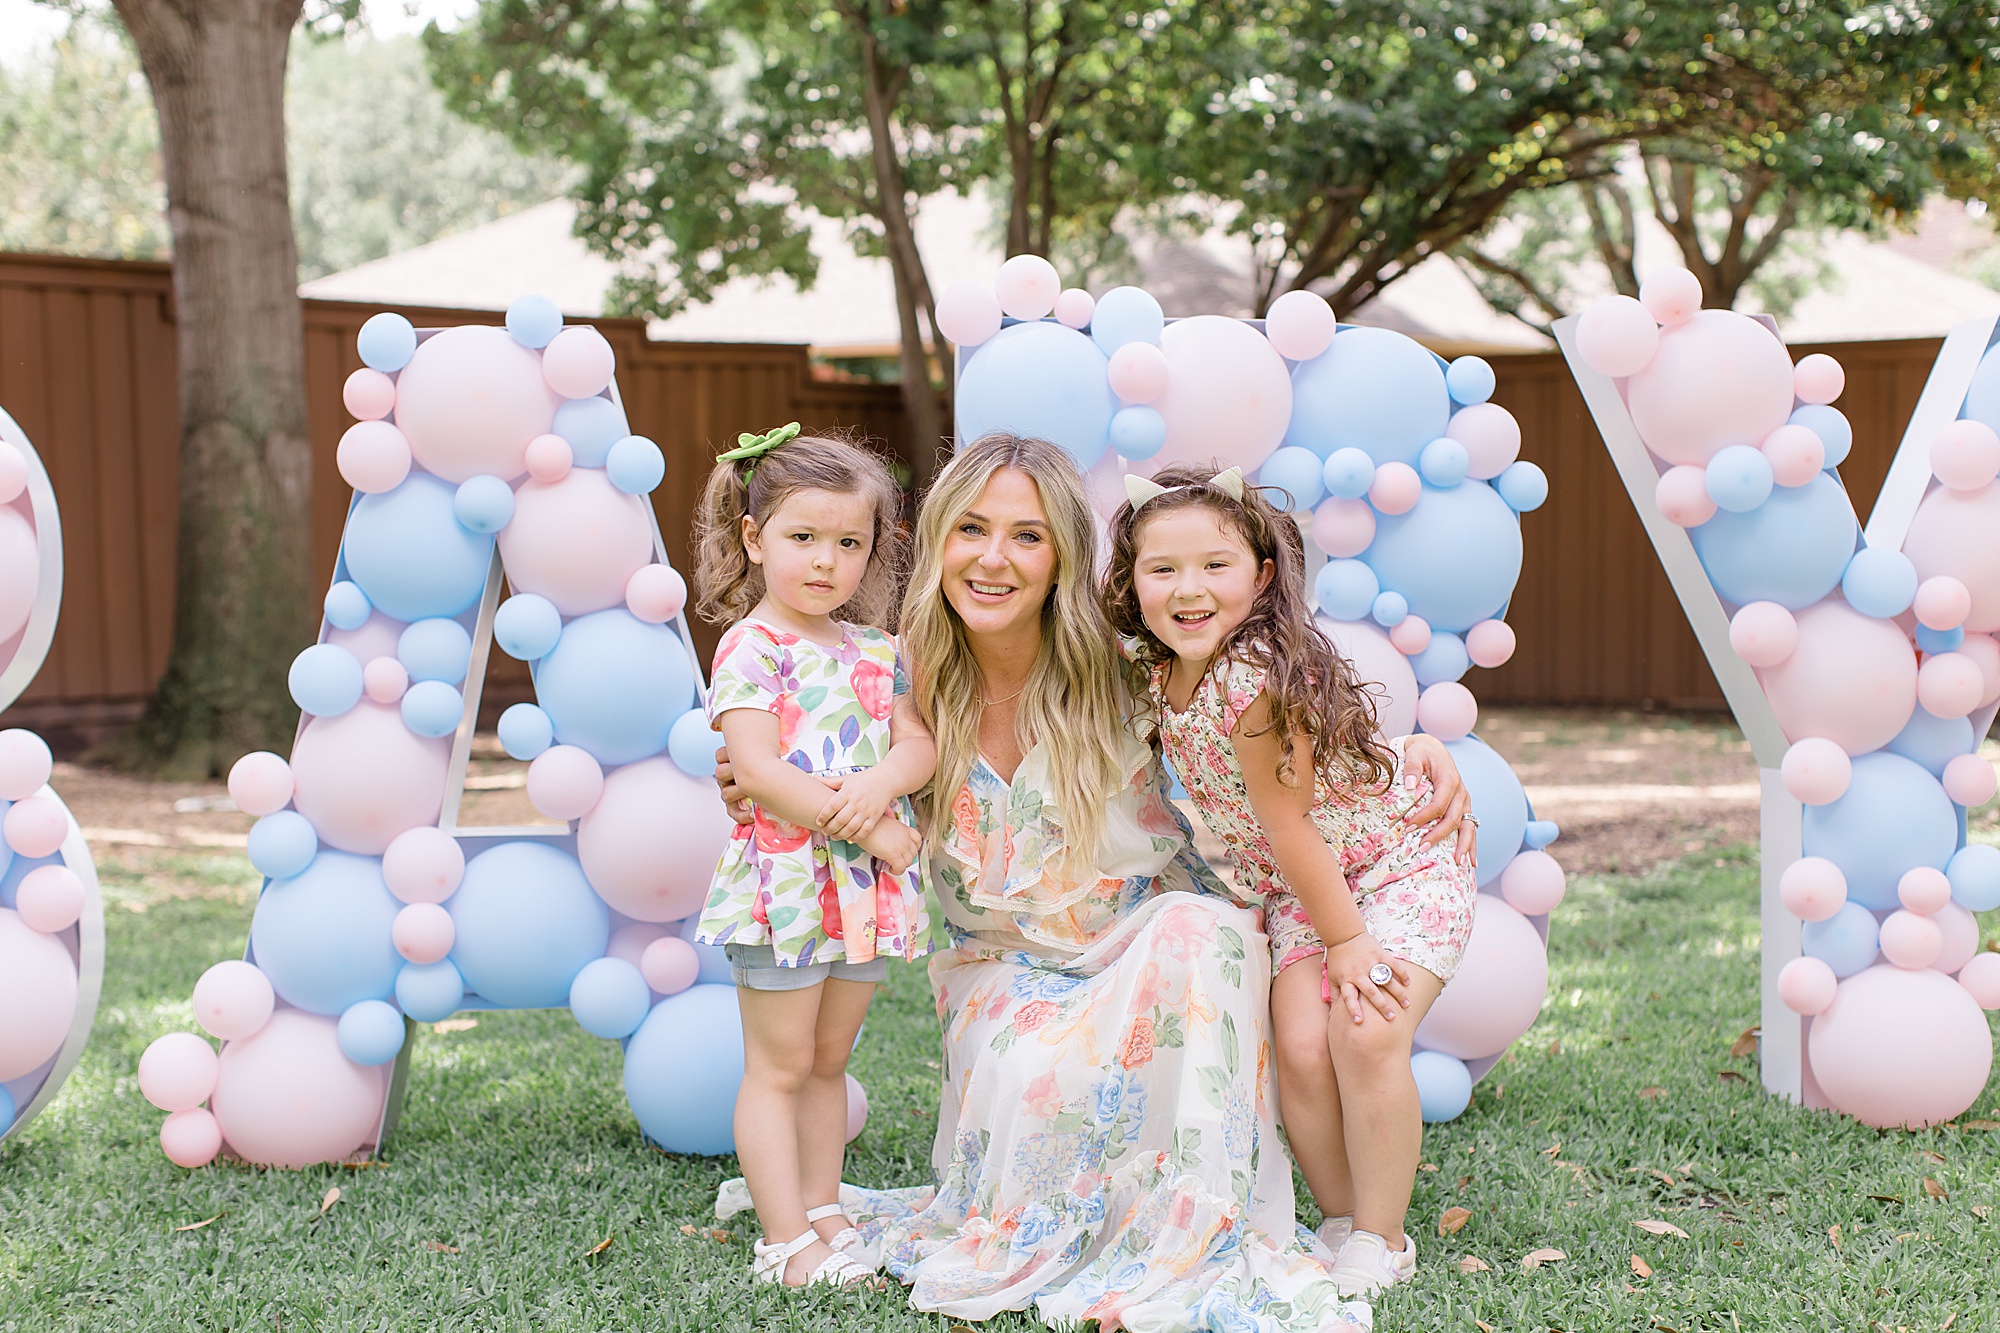 mom-to-be poses with kids in backyard